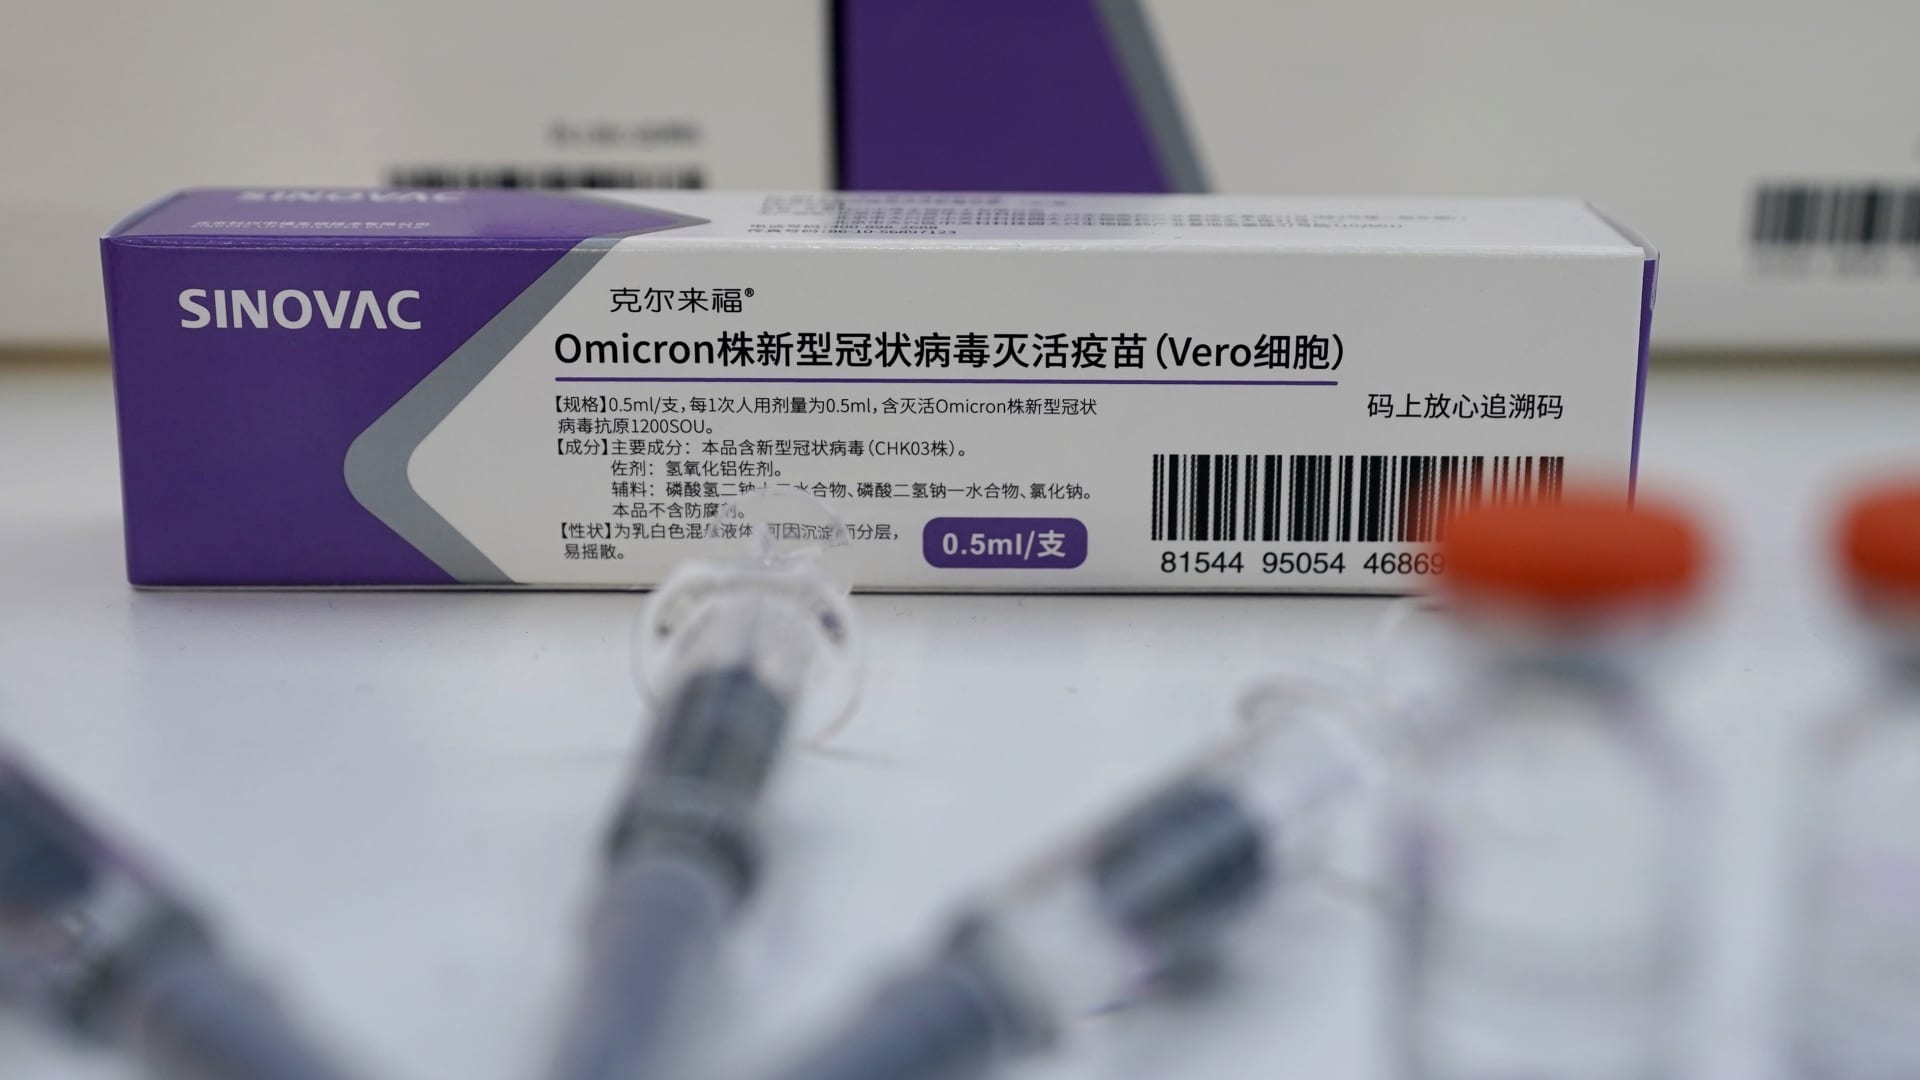 China ought to put aside politics and take a look at Covid jab imports, world’s largest vaccine maker says